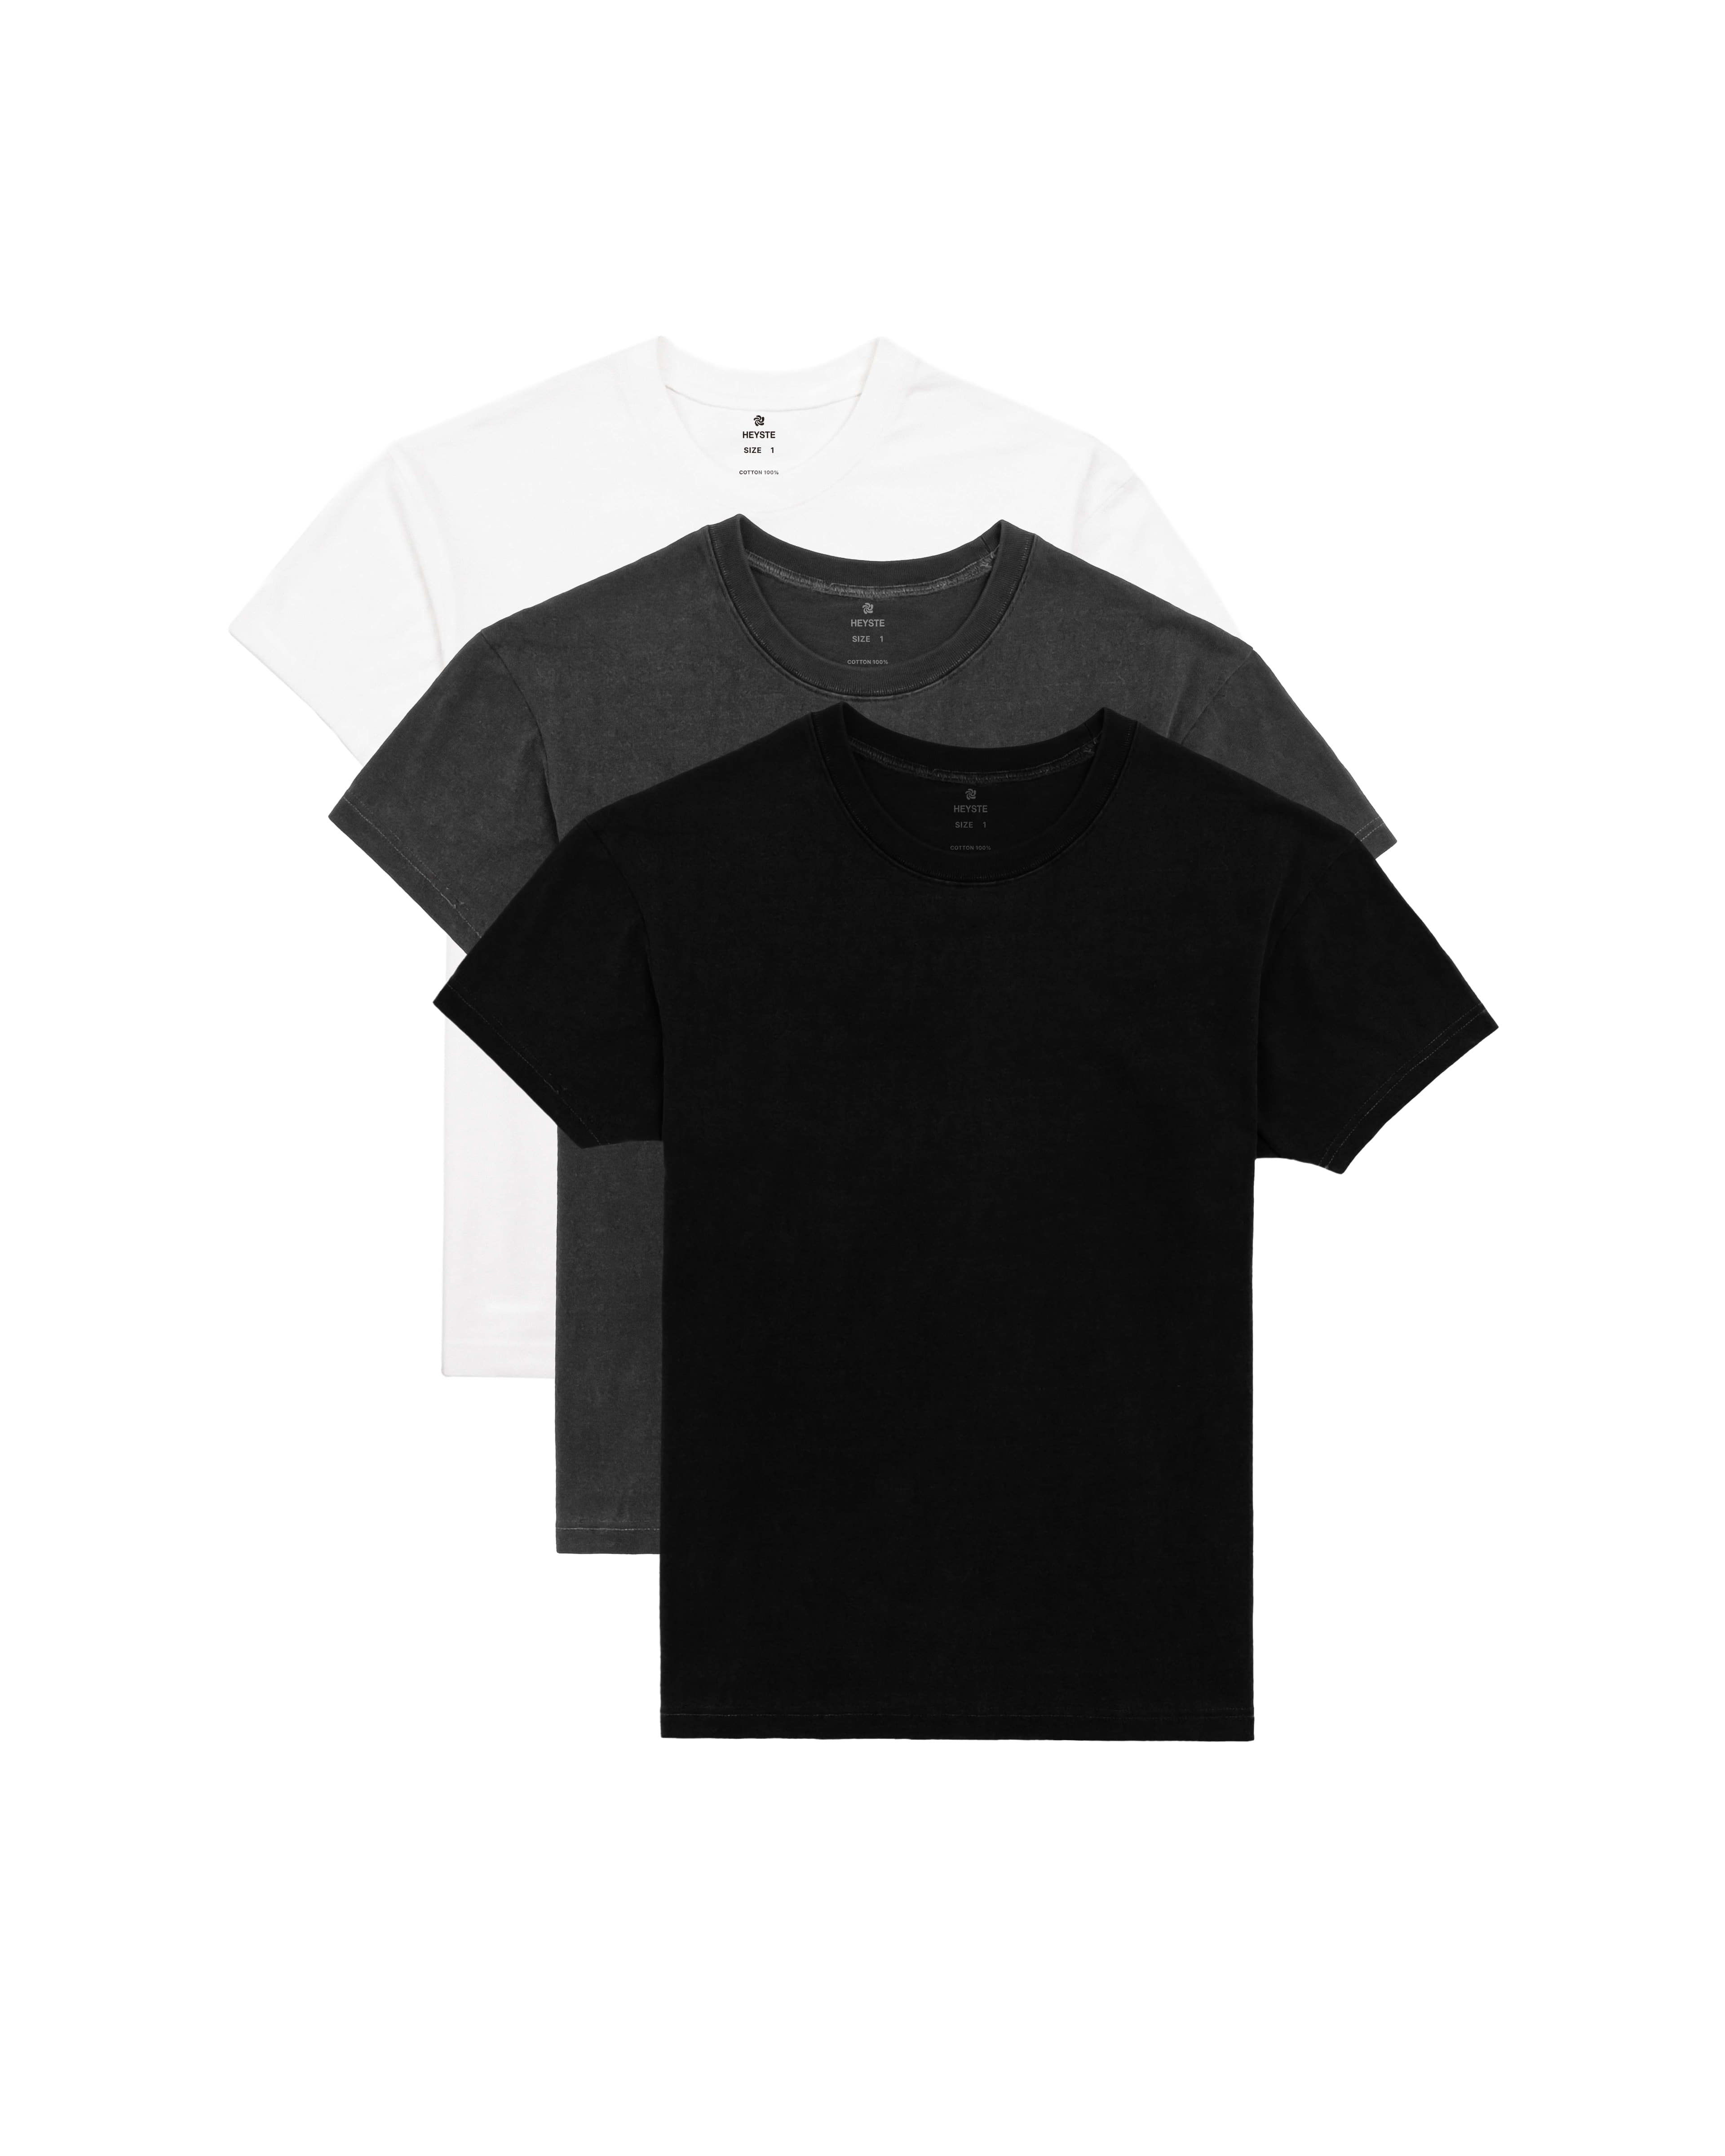 Classic Tees / 3 Pack